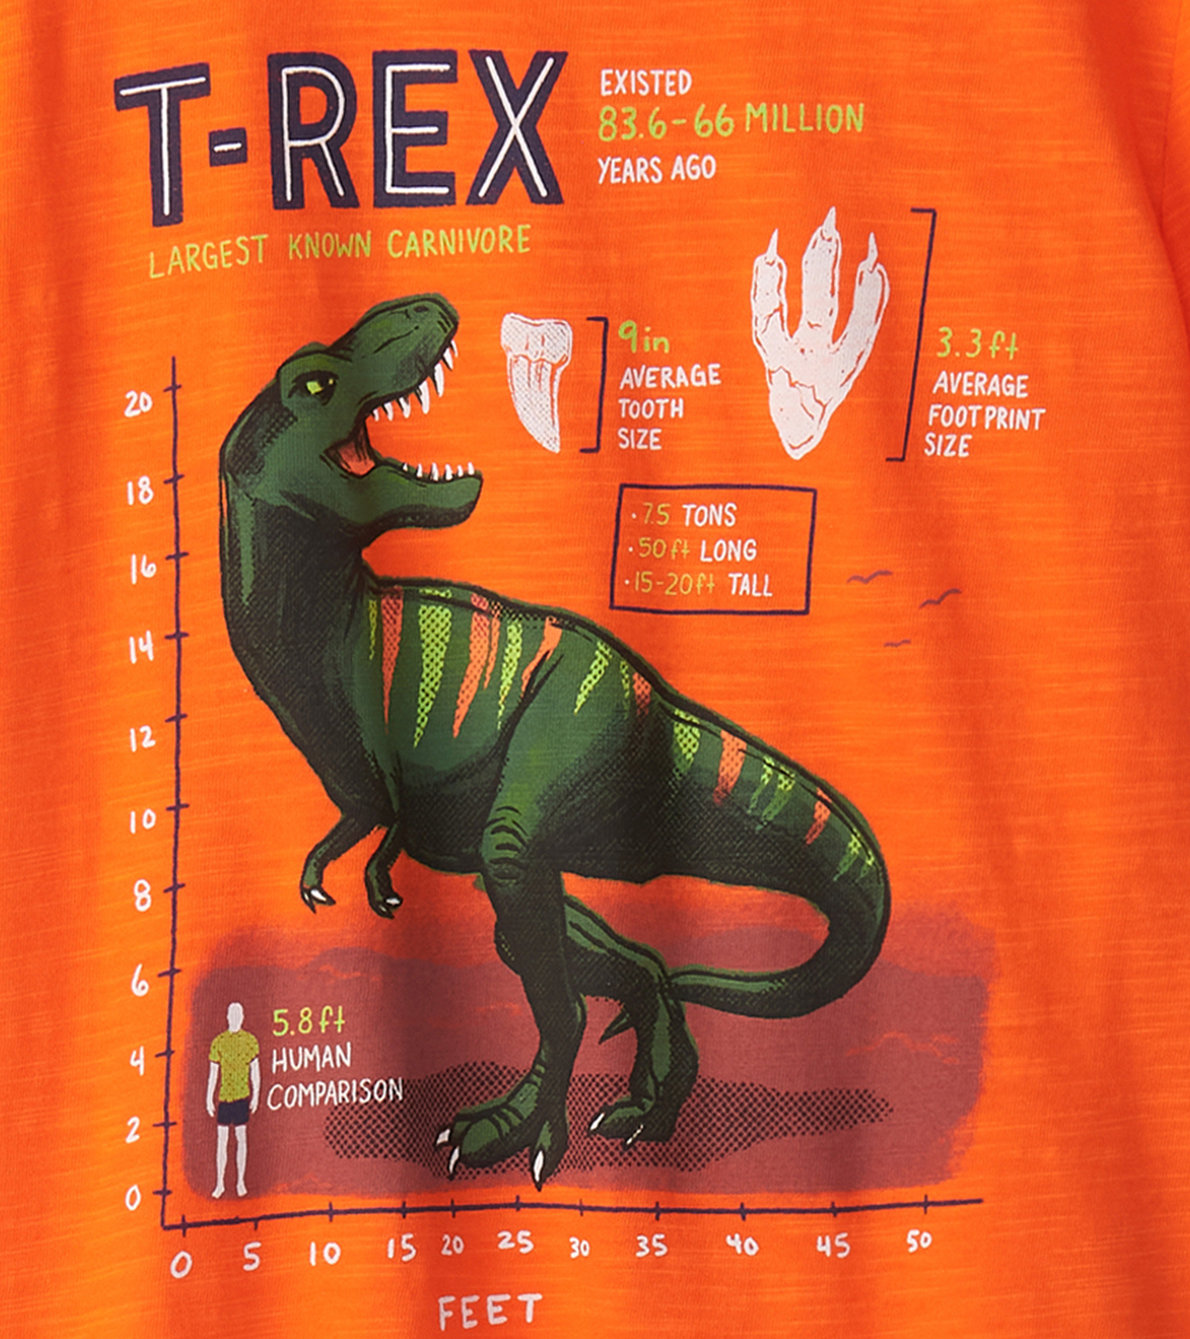 View larger image of Boys T-Rex Graphic Tee